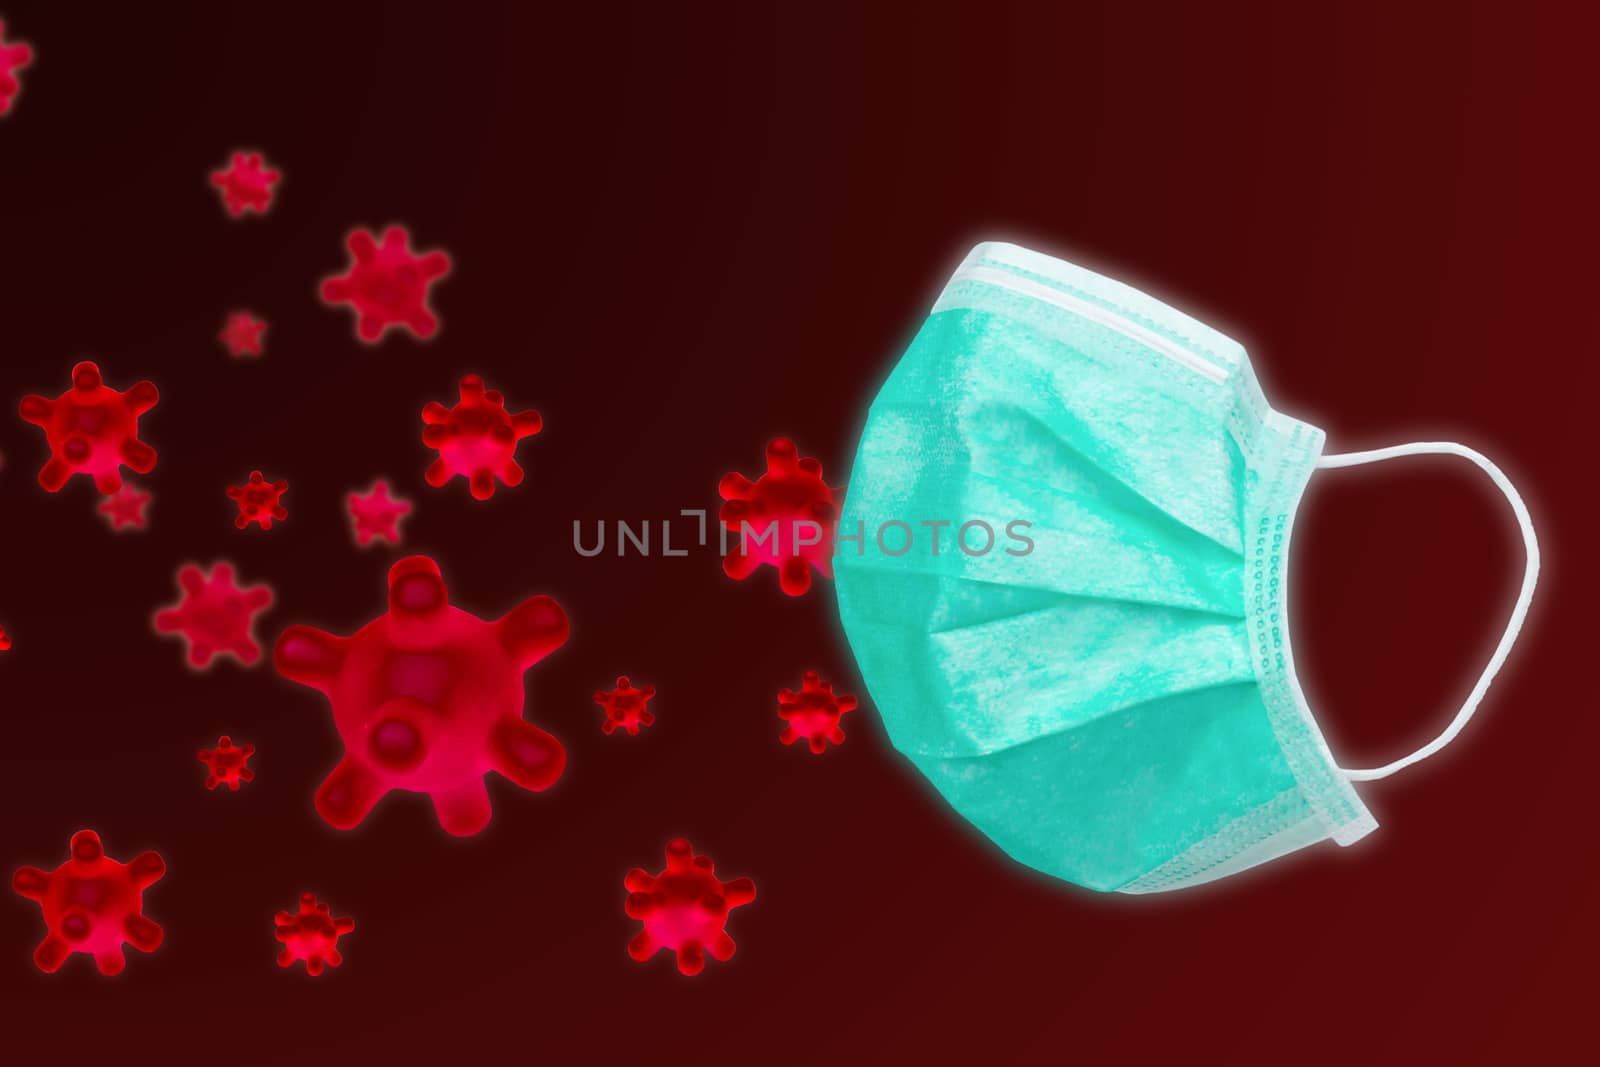 Mask virus protection Coronavirus 2019 (Covid-19) on a Red background by sompongtom